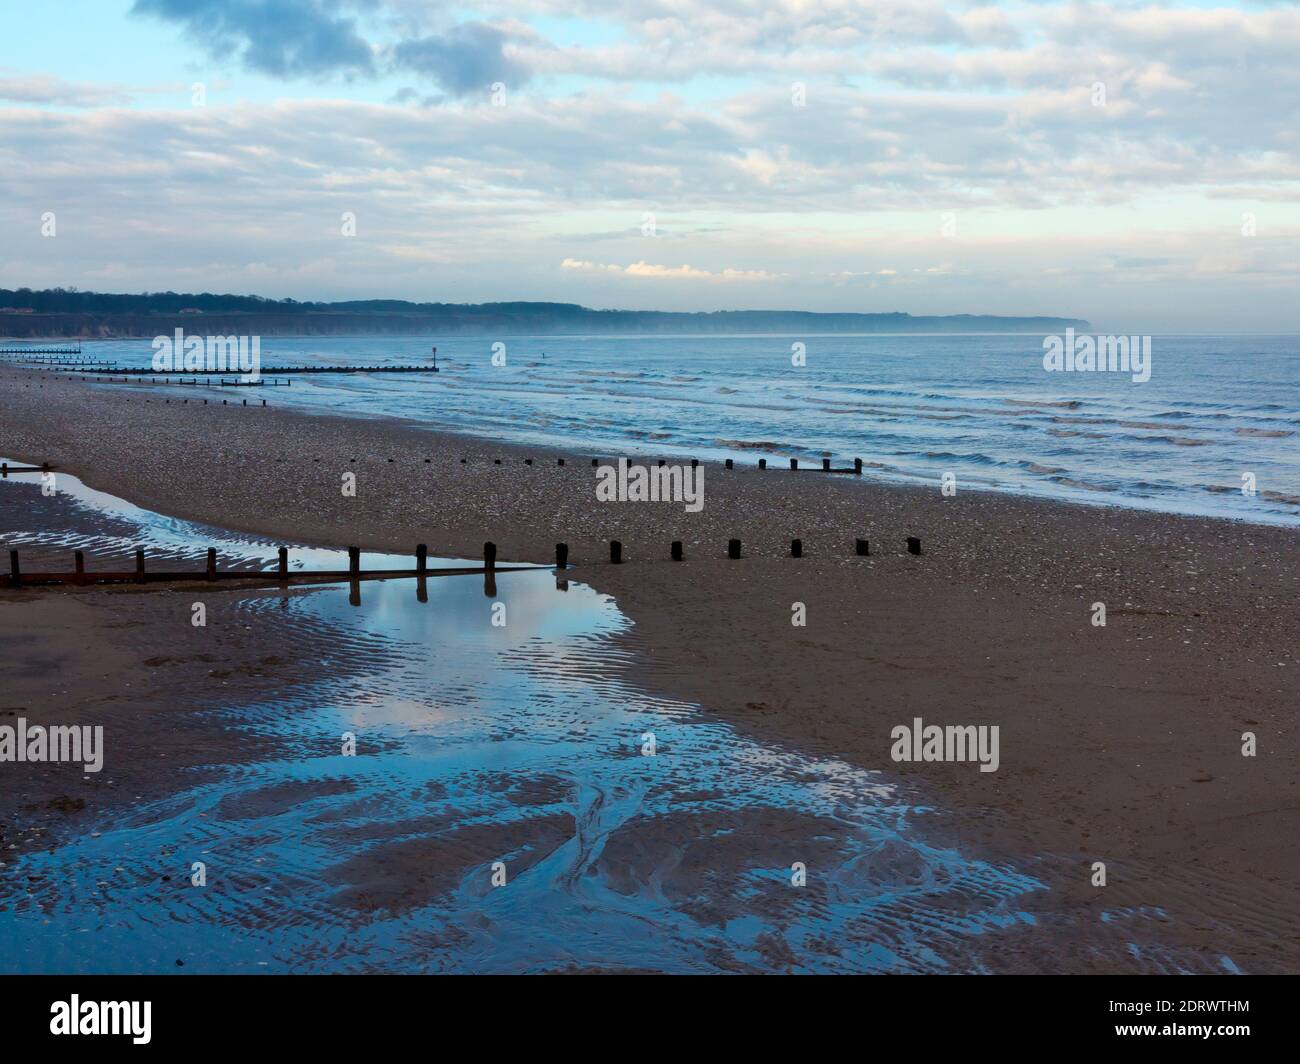 Winter view of the beach at Bridlington a popular seaside resort in the East Riding of Yorkshire England UK/ Stock Photo